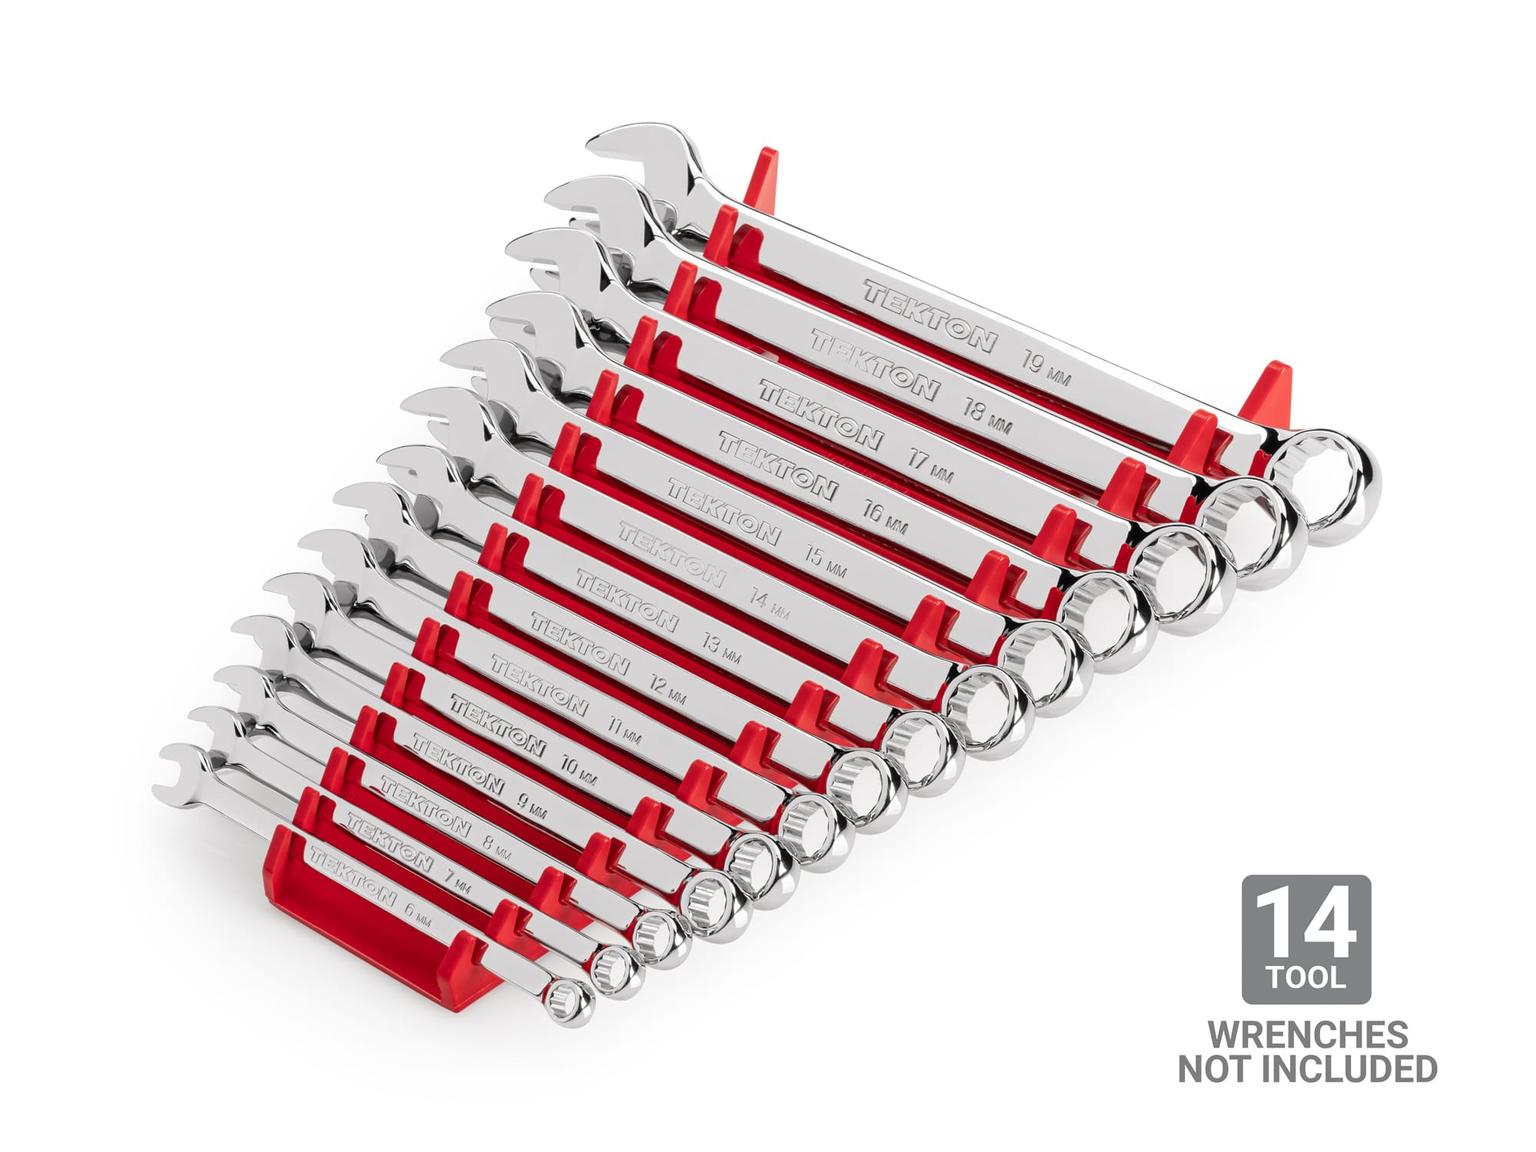 TEKTON OWP12214-T 14-Tool Combination Wrench Organizer Rack (Red)